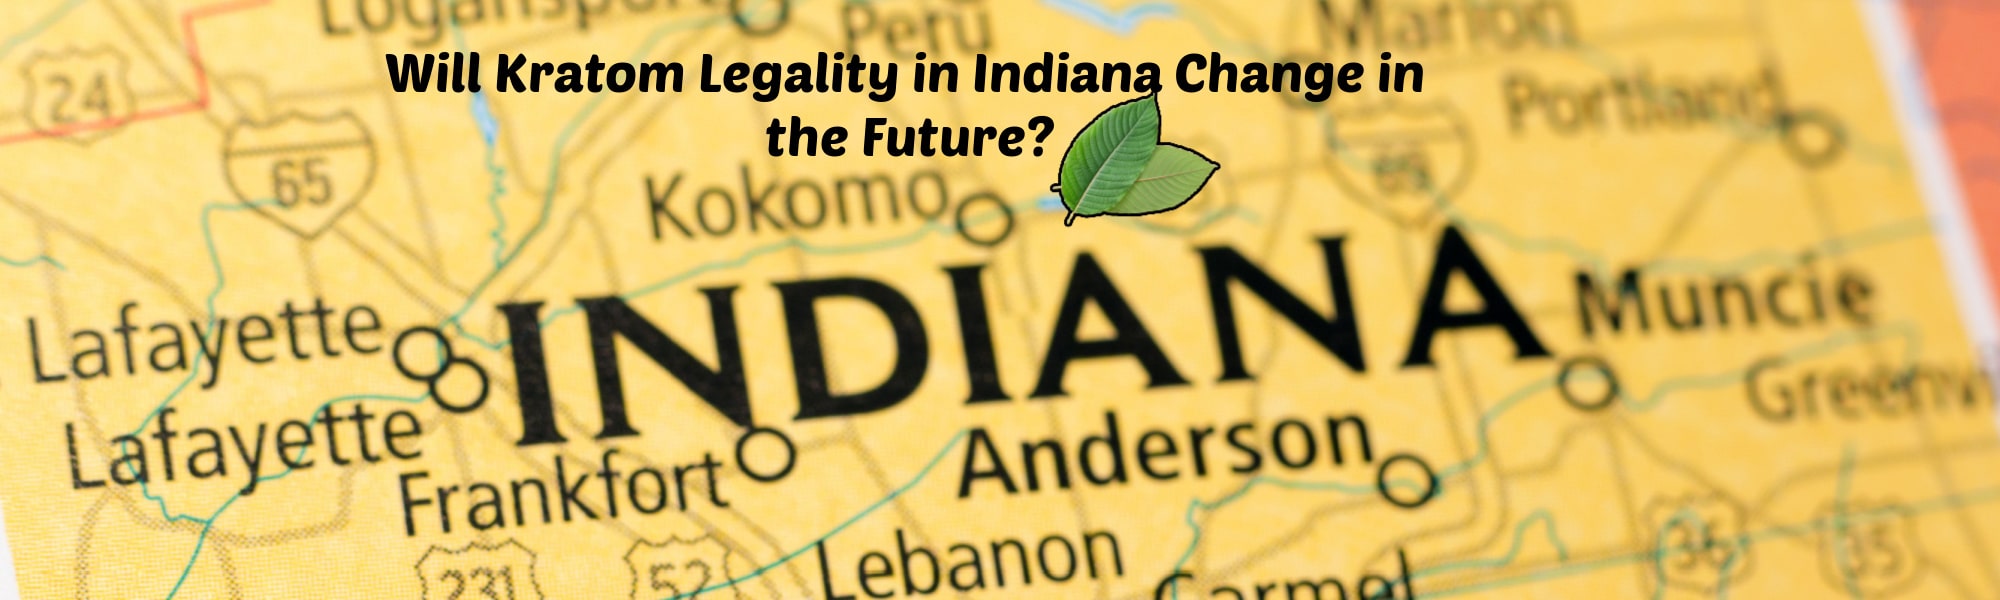 image of will kratom legality in indiana change in the future